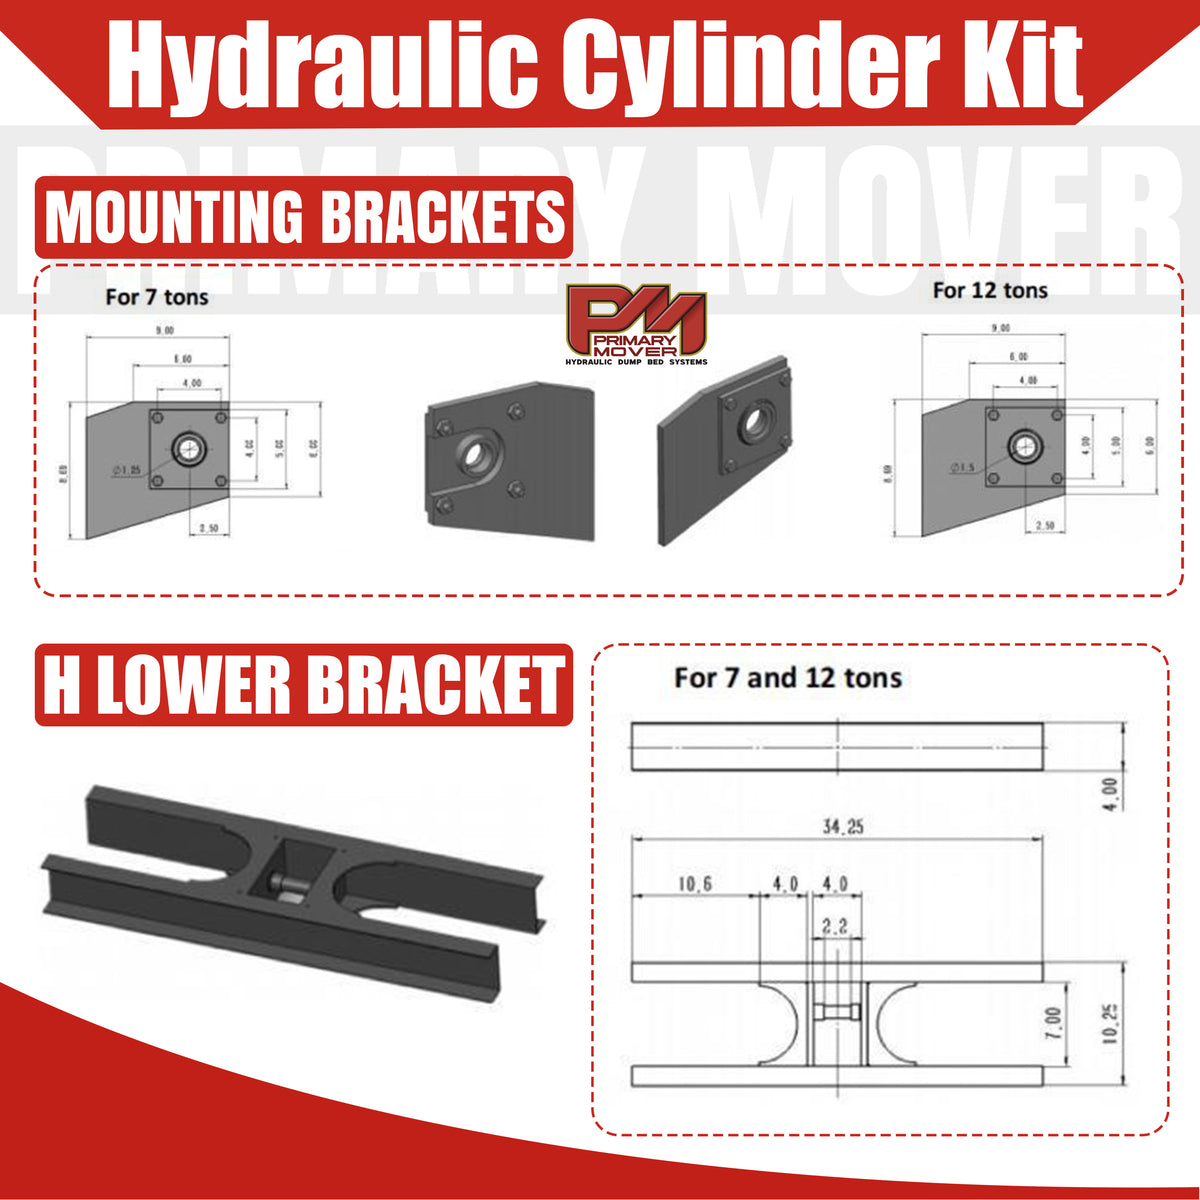 Diagram of Telescopic Dump Trailer Cylinder Kit - 30 Ton Capacity - 108 Stroke, includes hydraulic components and brackets, designed for 10-14' dump bodies.